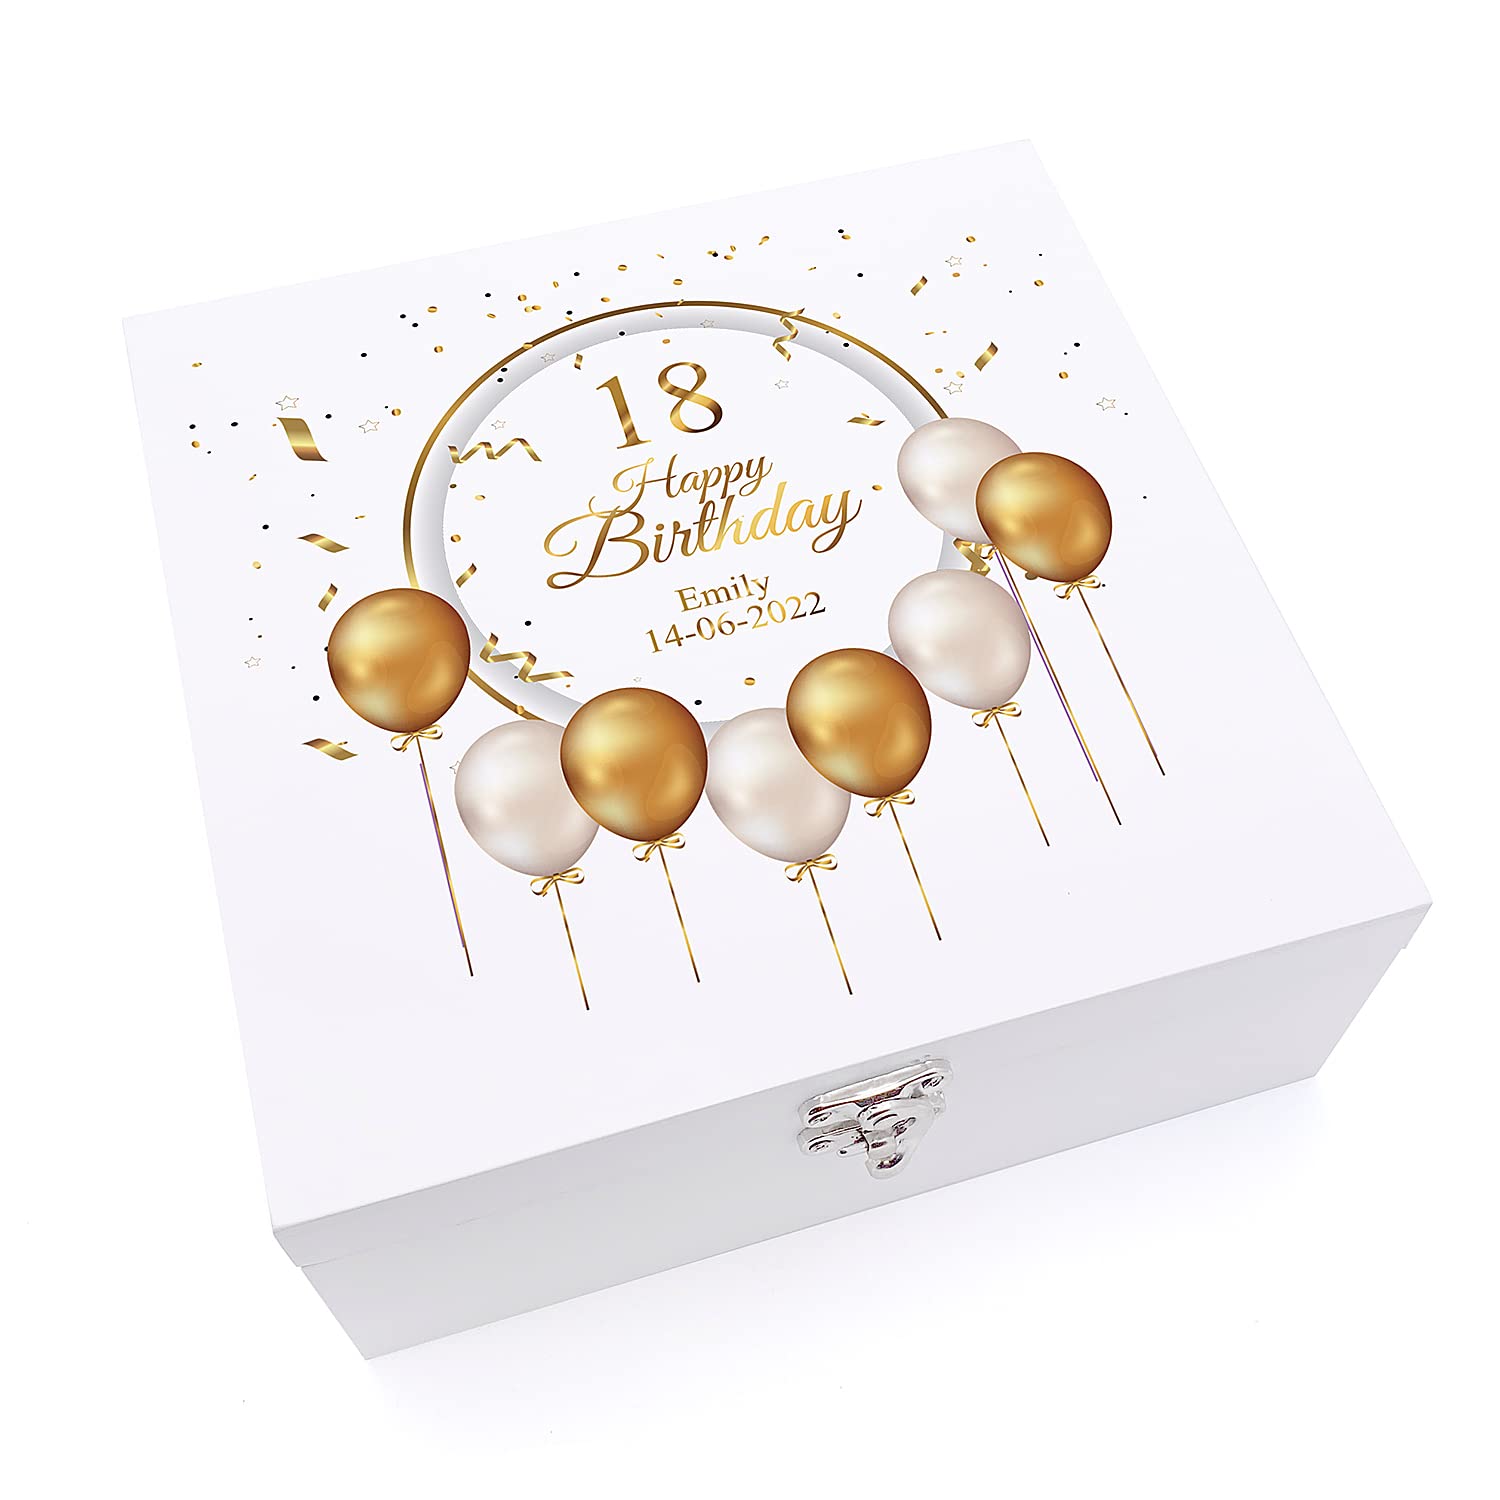 ukgiftstoreonline Personalised 18th Birthday Wooden Box Gift With Golden Balloons